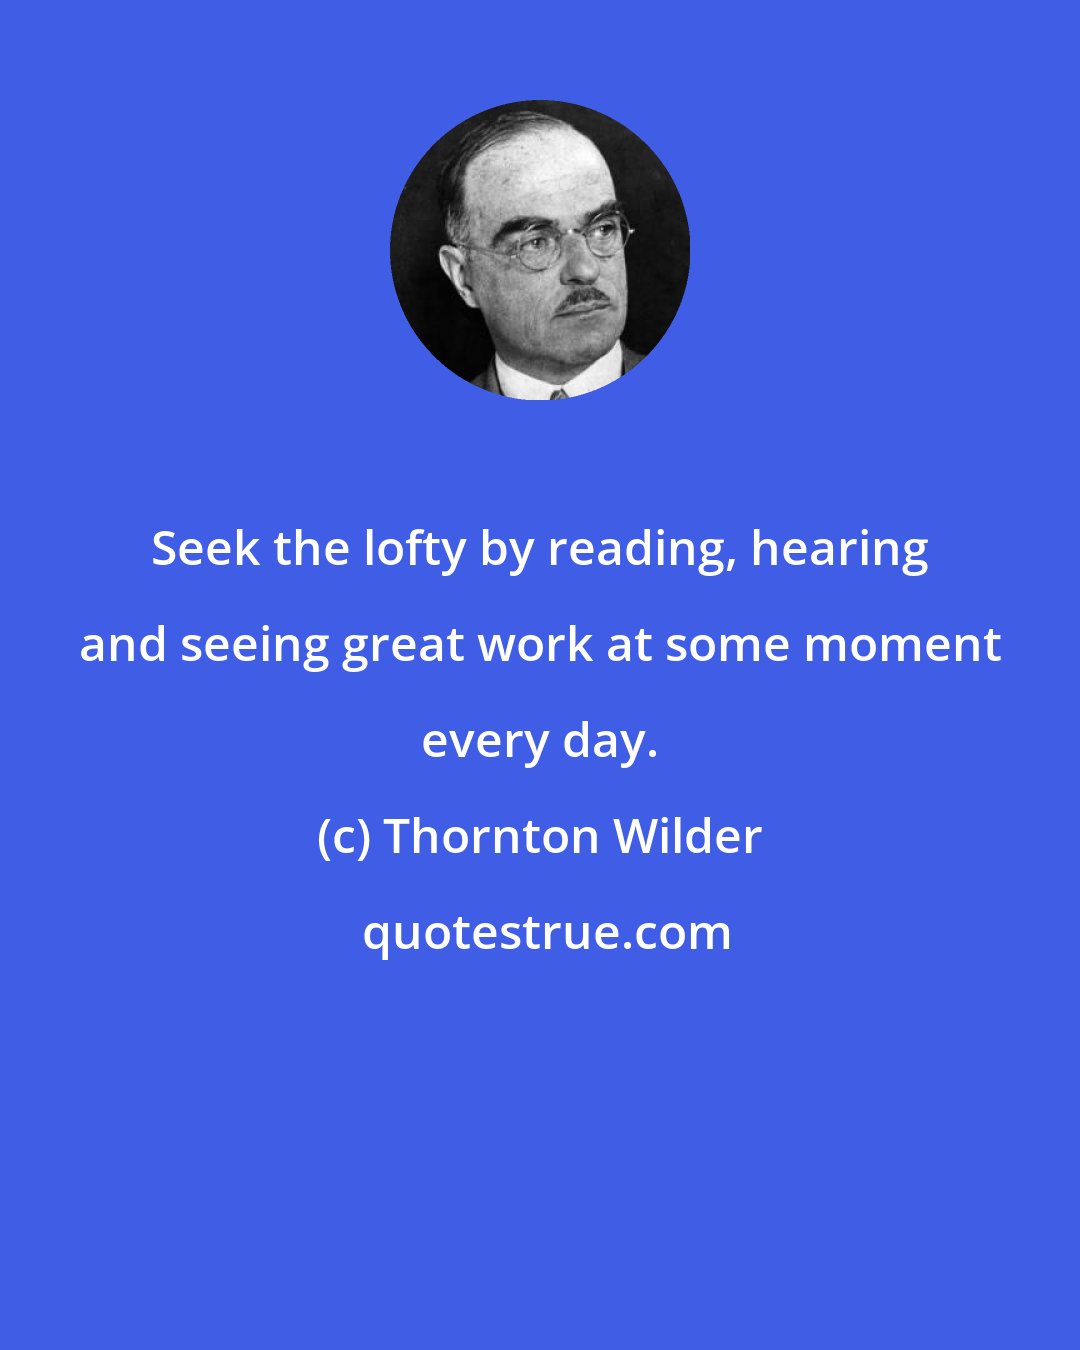 Thornton Wilder: Seek the lofty by reading, hearing and seeing great work at some moment every day.